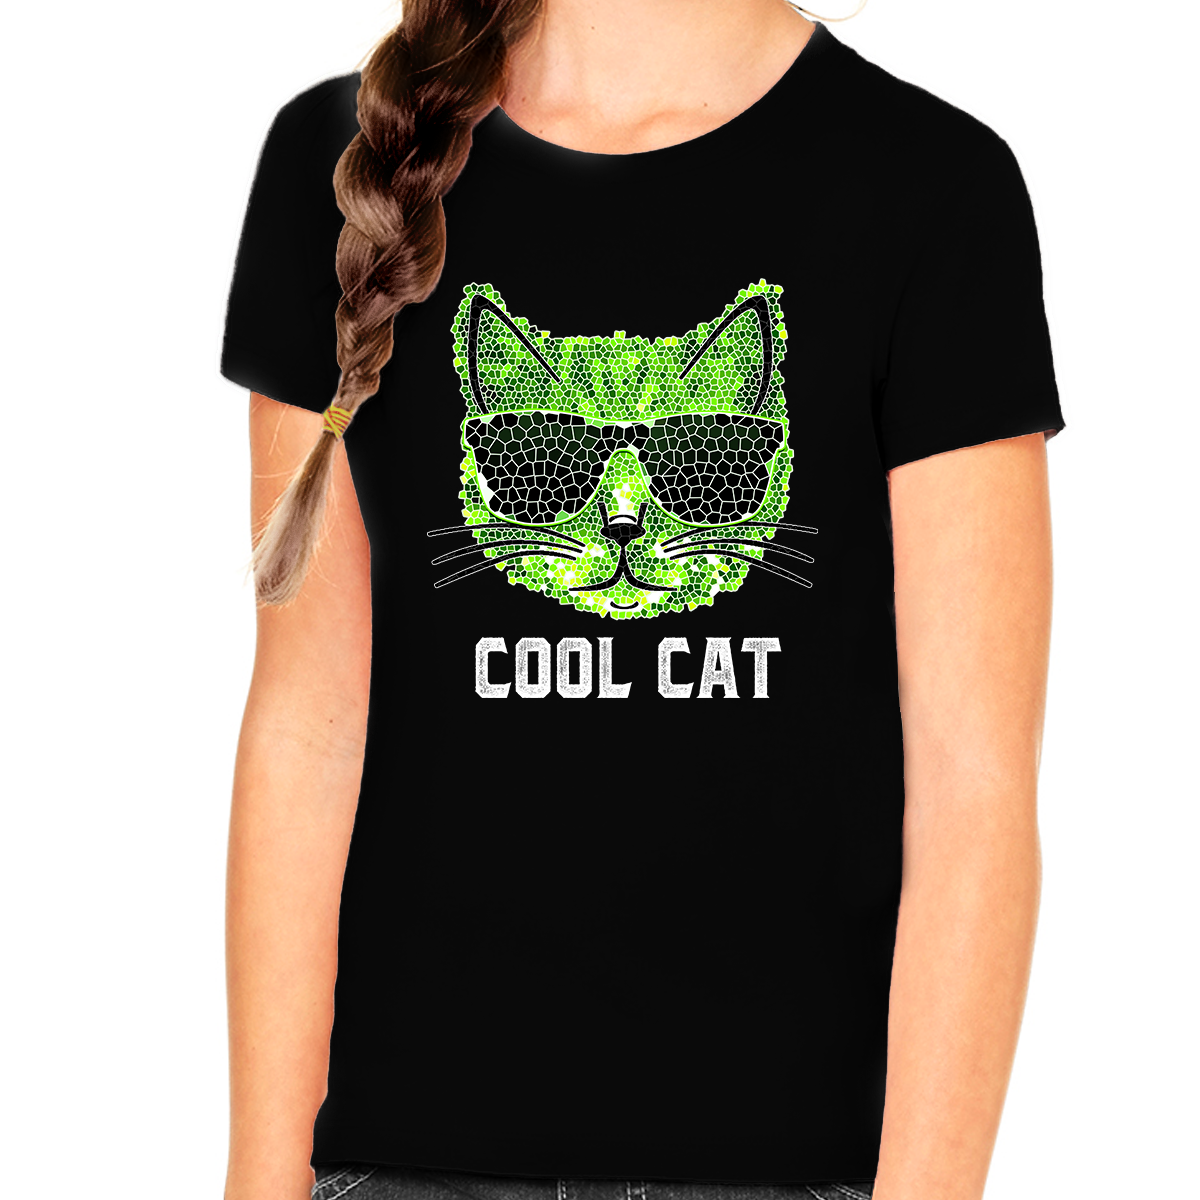 Cool Cat Shirt - Cool Cat Shirts for Girls - Cat Gifts for Girls - Kids Cat Lover Shirts - Fire Fit Designs